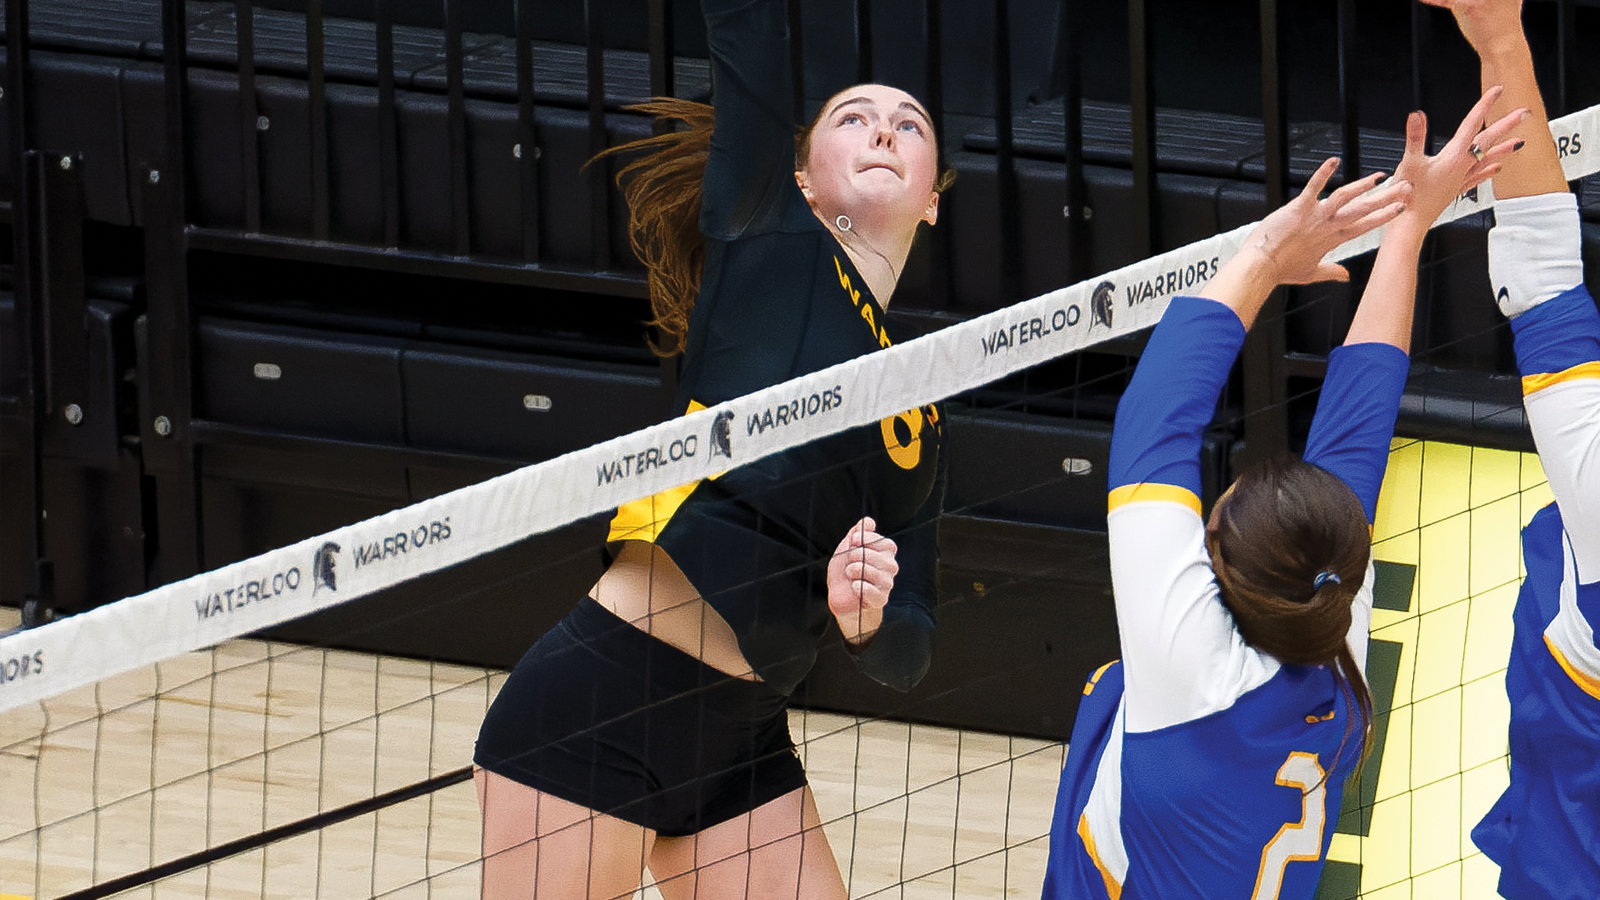 Waterloo women's volleyball player Avery Kelly jumping up for a spike at the net during a game with two opposing players attempting a block on the other side of the net